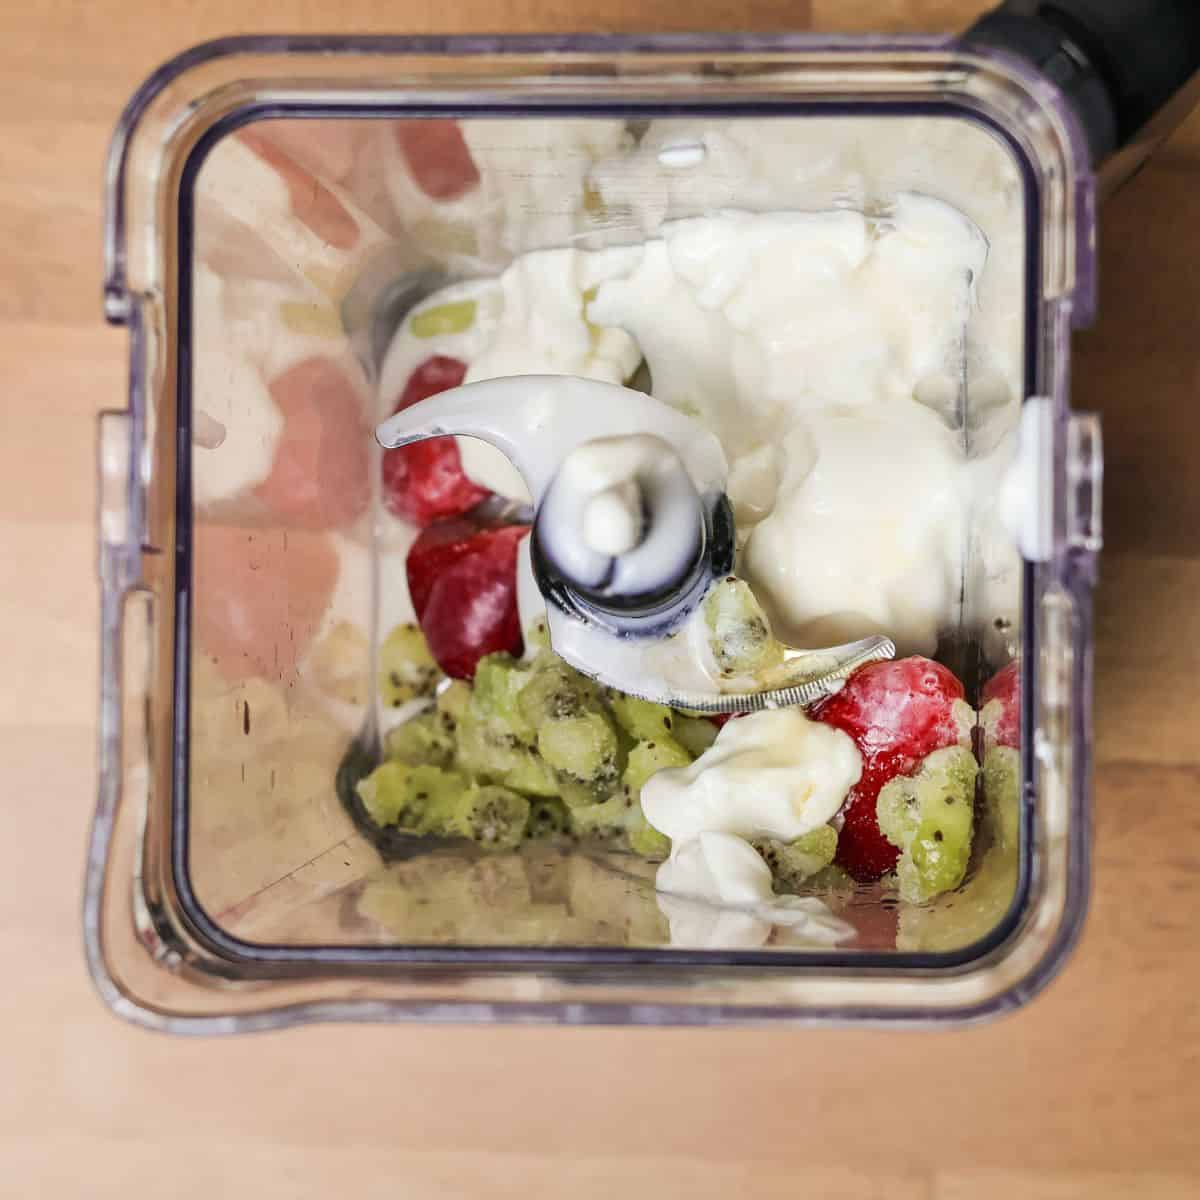 Ingredients for a kiwi quencher smoothie, including frozen strawberries, frozen kiwi pieces, and dollops of Greek yogurt, are placed inside a blender, ready to be mixed.